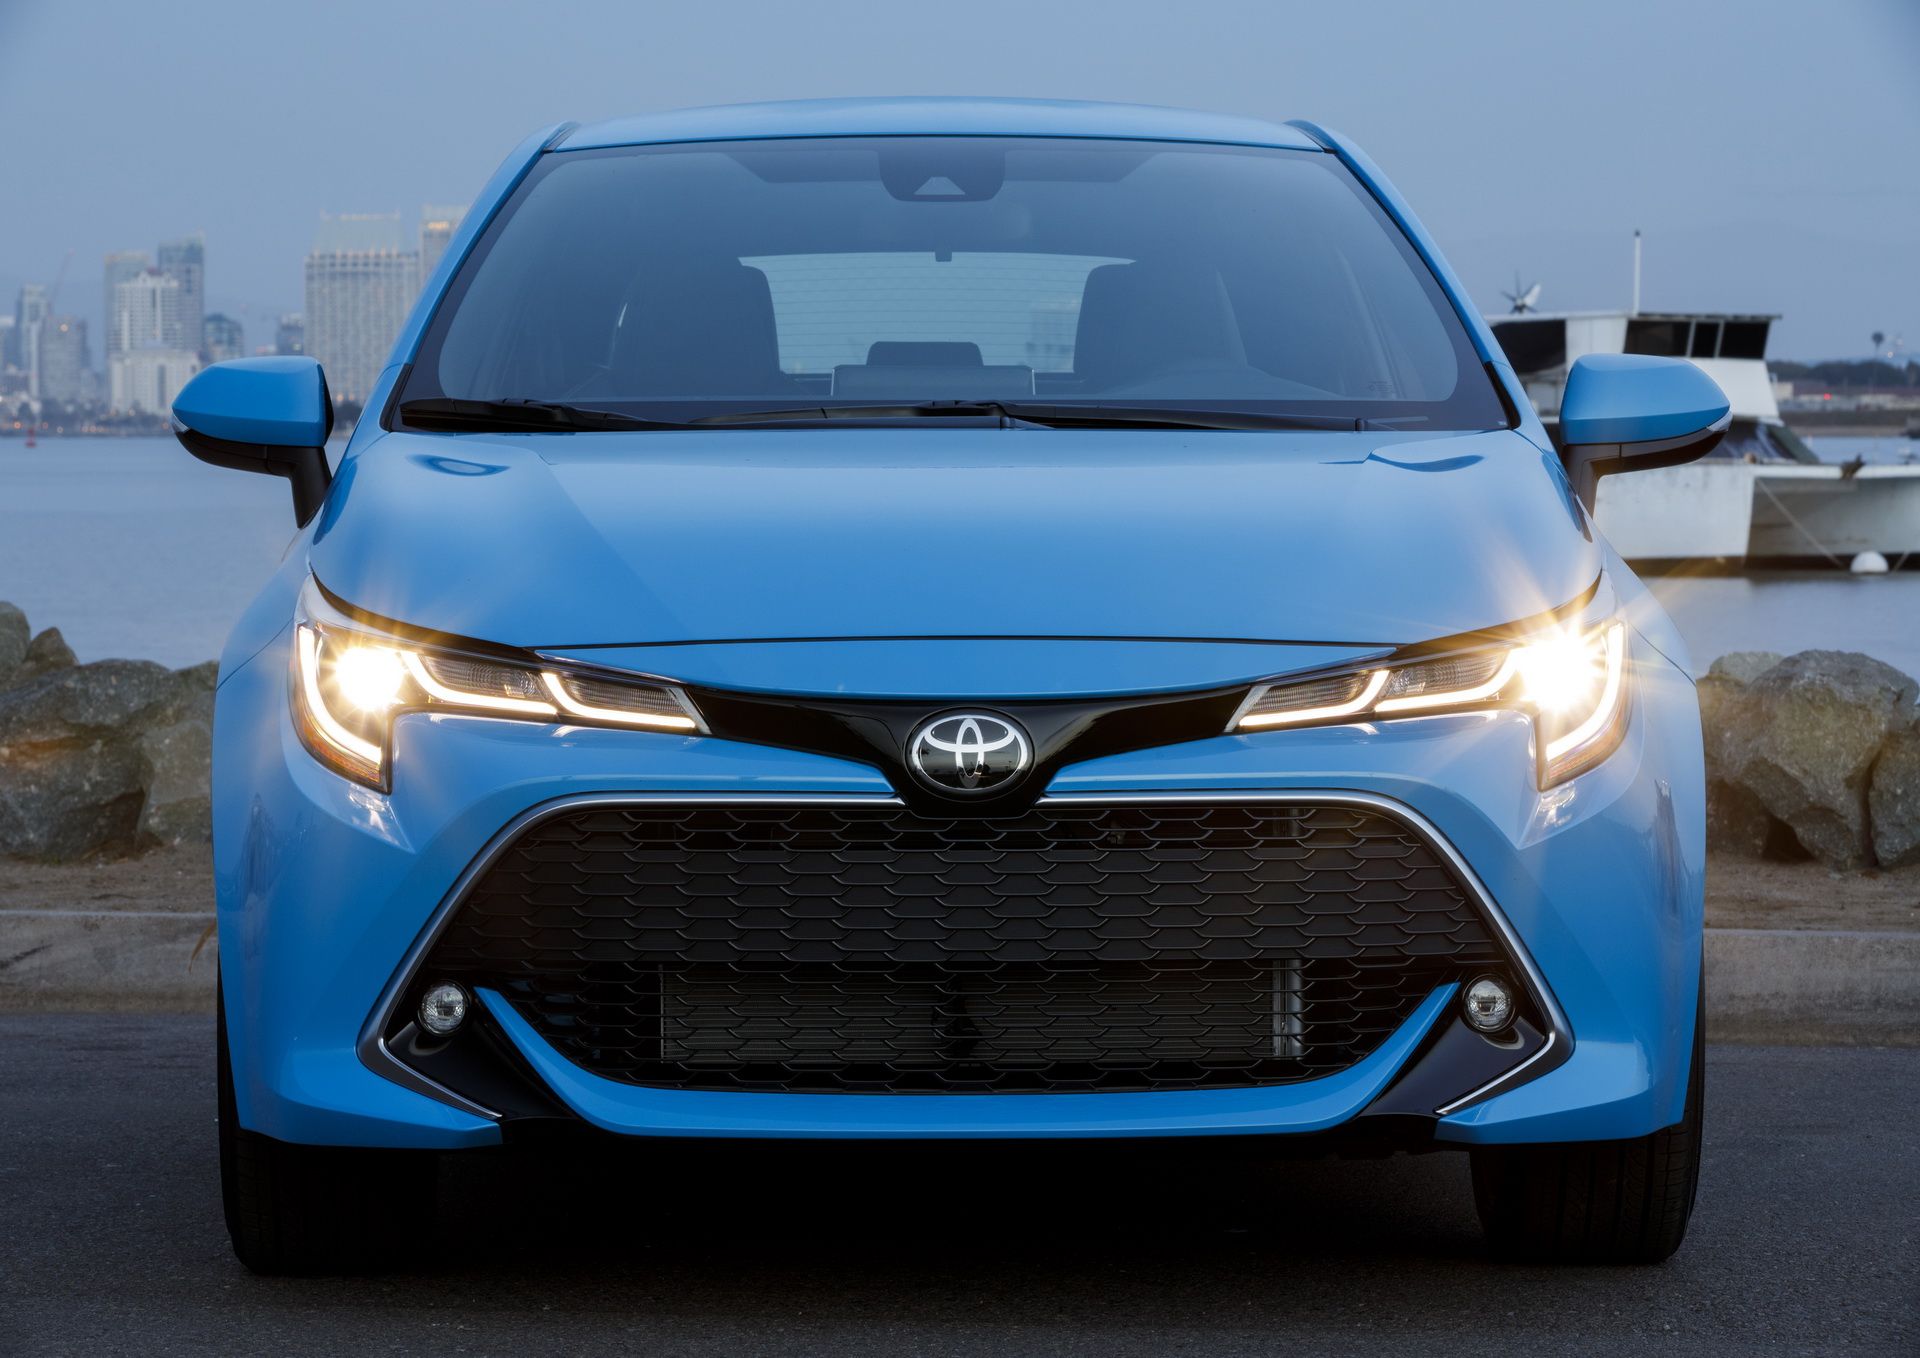 Toyota Expected To Debut New Corolla Sedan For 2020 Model ...